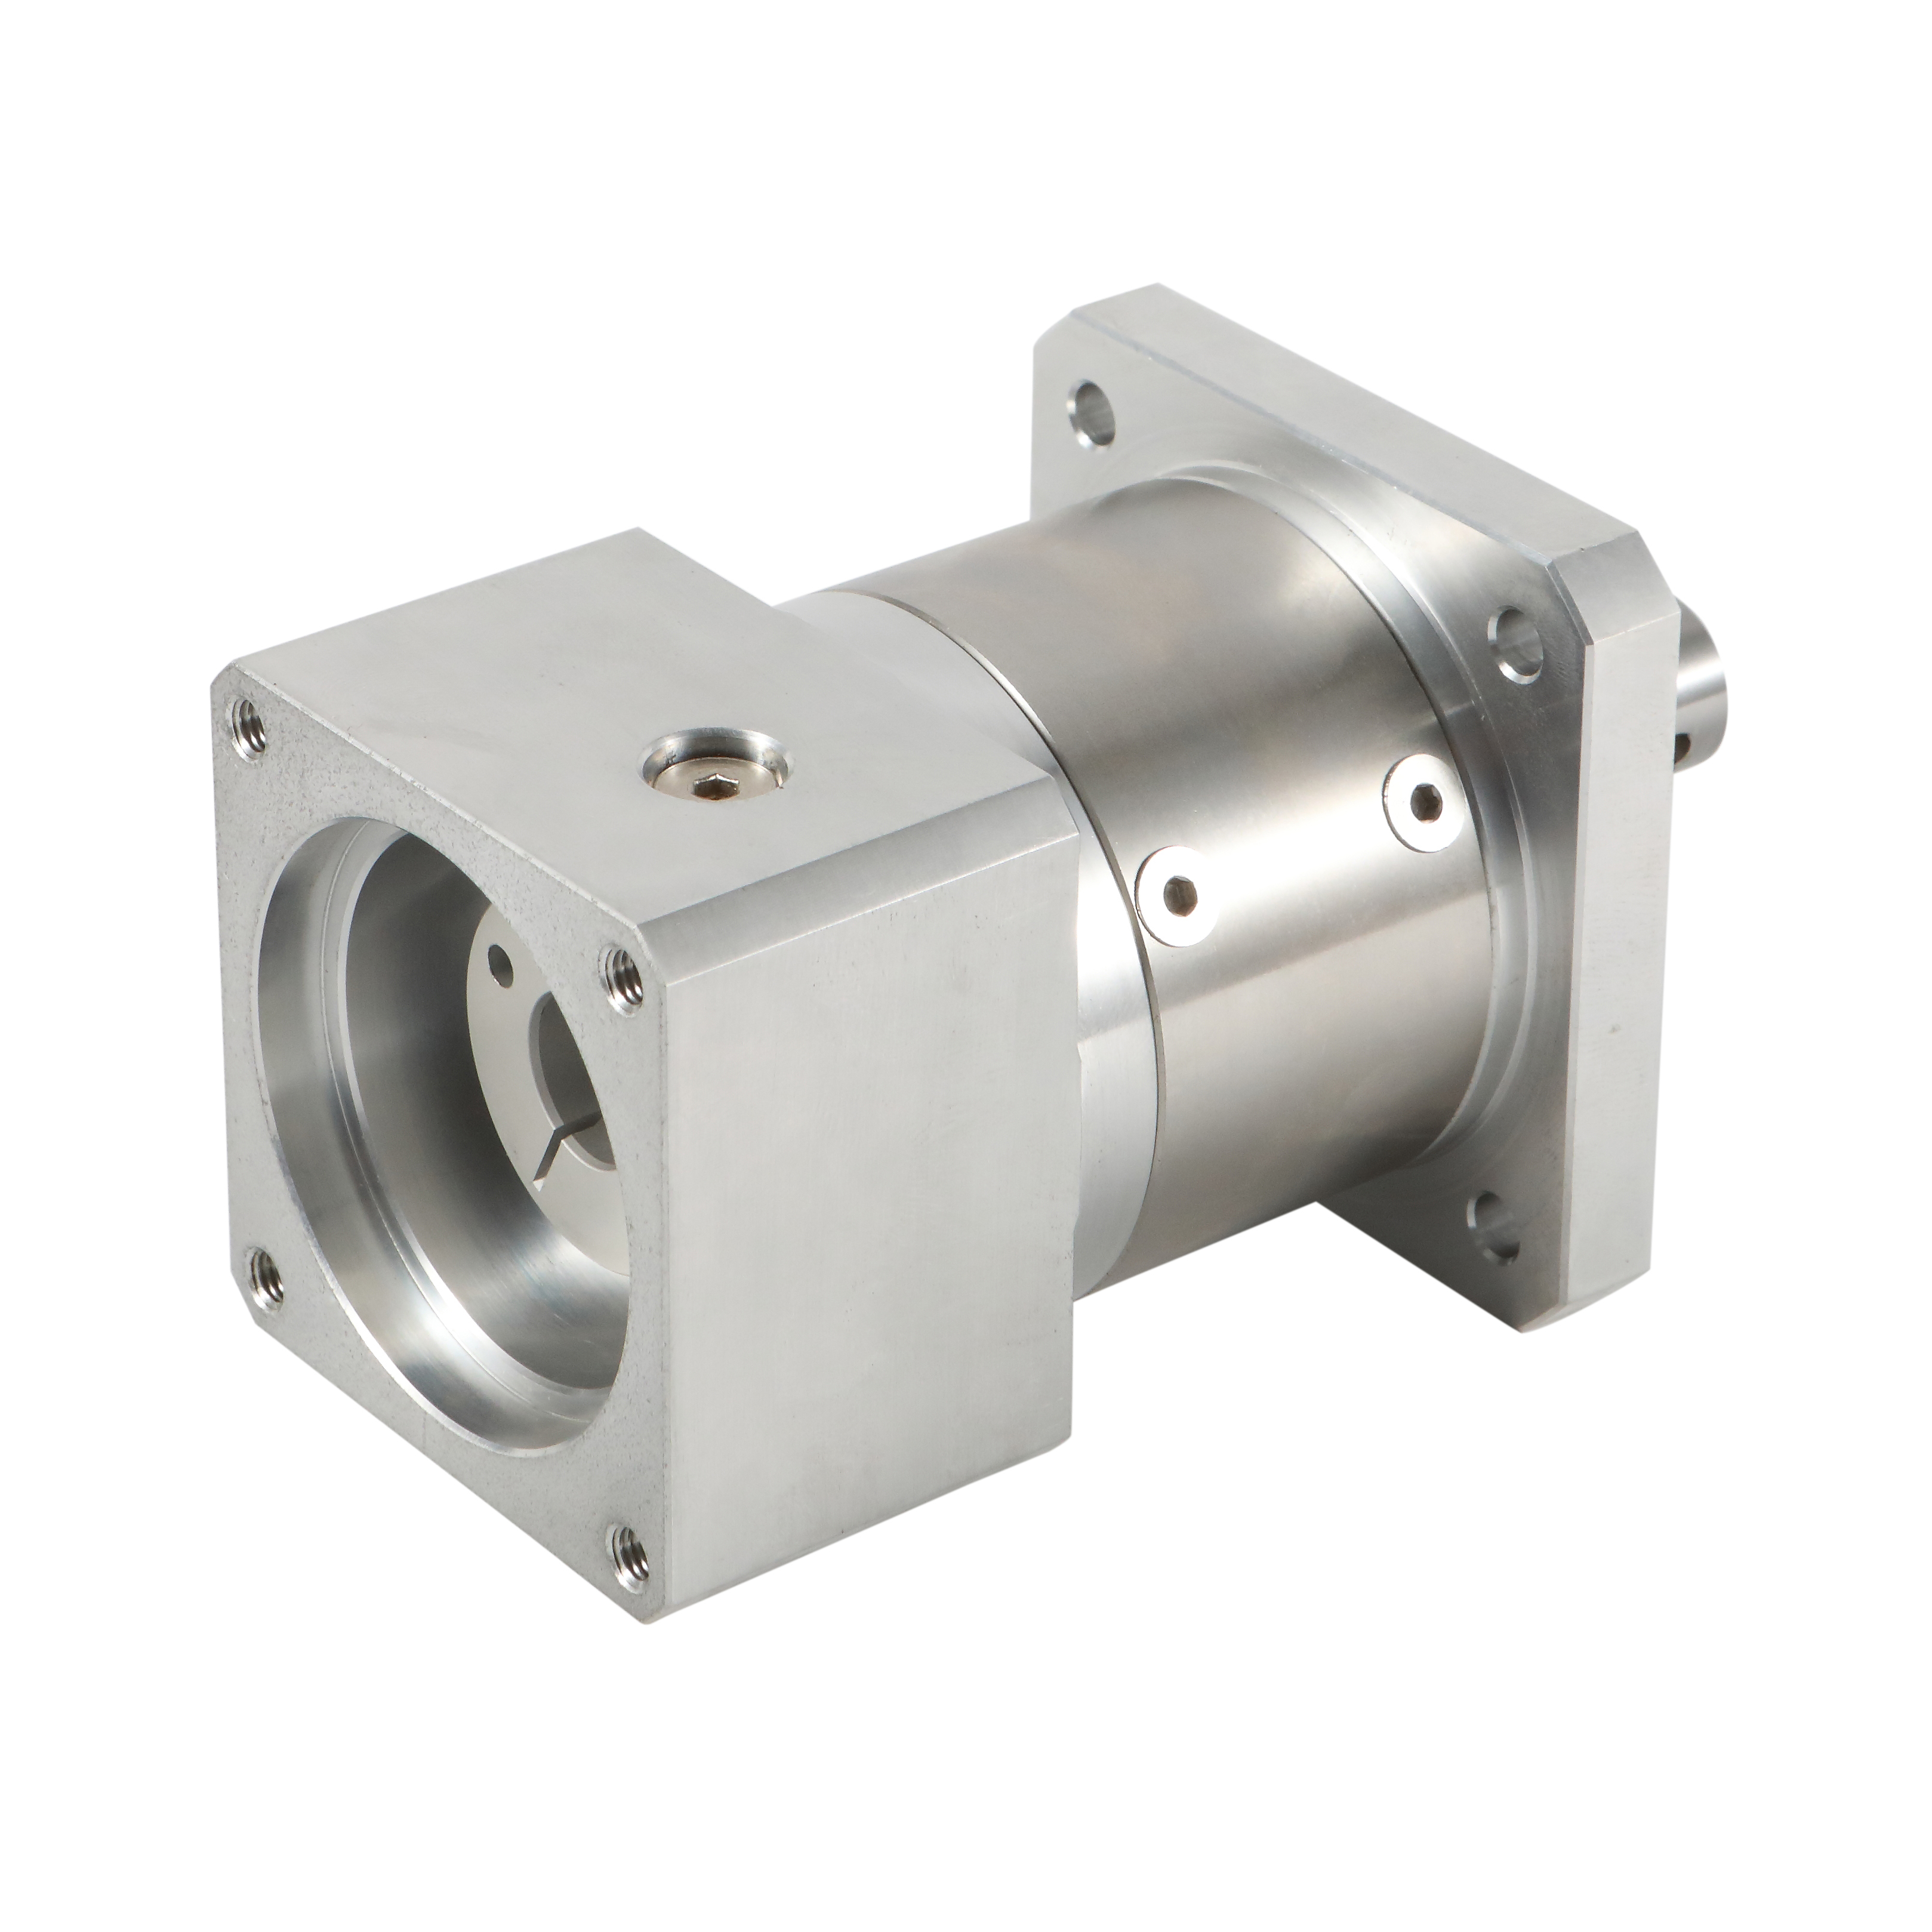 High Precision Low Backlash Planetary Gearbox Square Flange Reduction for Servo Motor